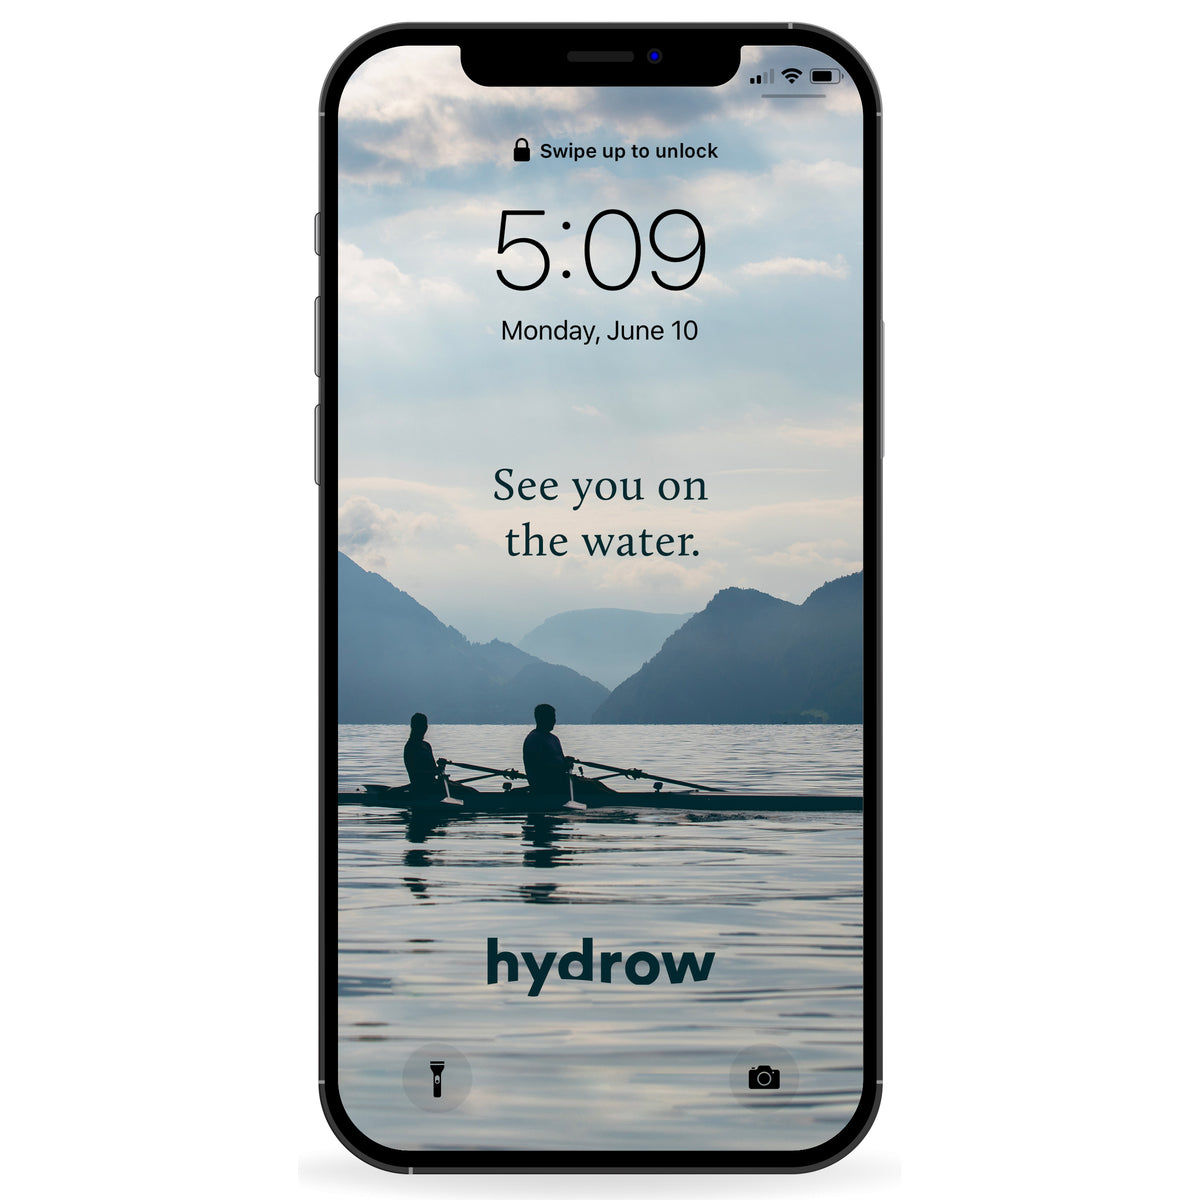 phone background featuring 2 people rowing in boat and text &quot;See you on the water. hydrow&quot;